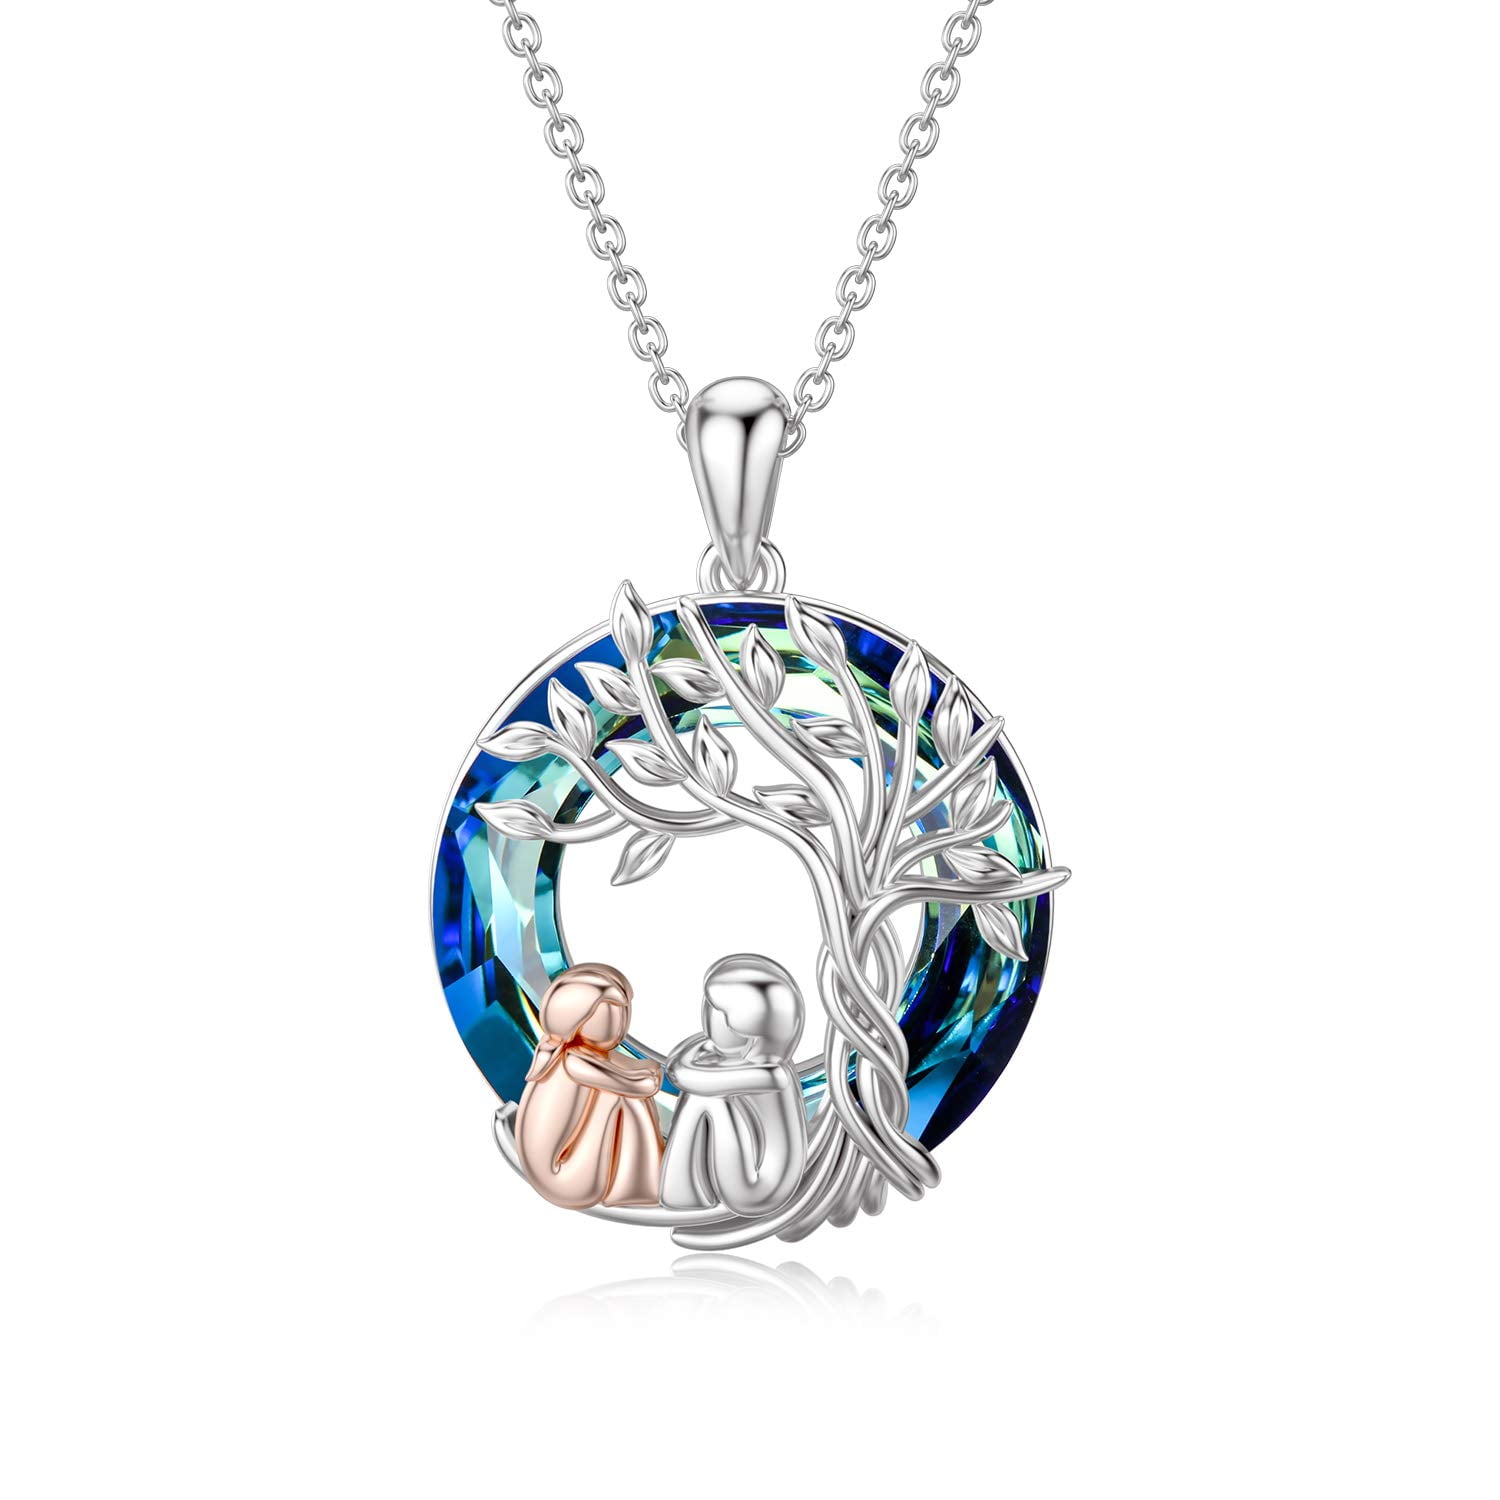 WINNICACA Valentines Day Gifts Her Sister Birthday 925 Sterling Silver Tree Life 2 Sisters Necklace Blue Crystal Jewelry Women Girls Daughter Friends b3227da3 9115 4572 92a9 1a5d54cce063.5e37a19cd4d4678637280a60c6e25a3b